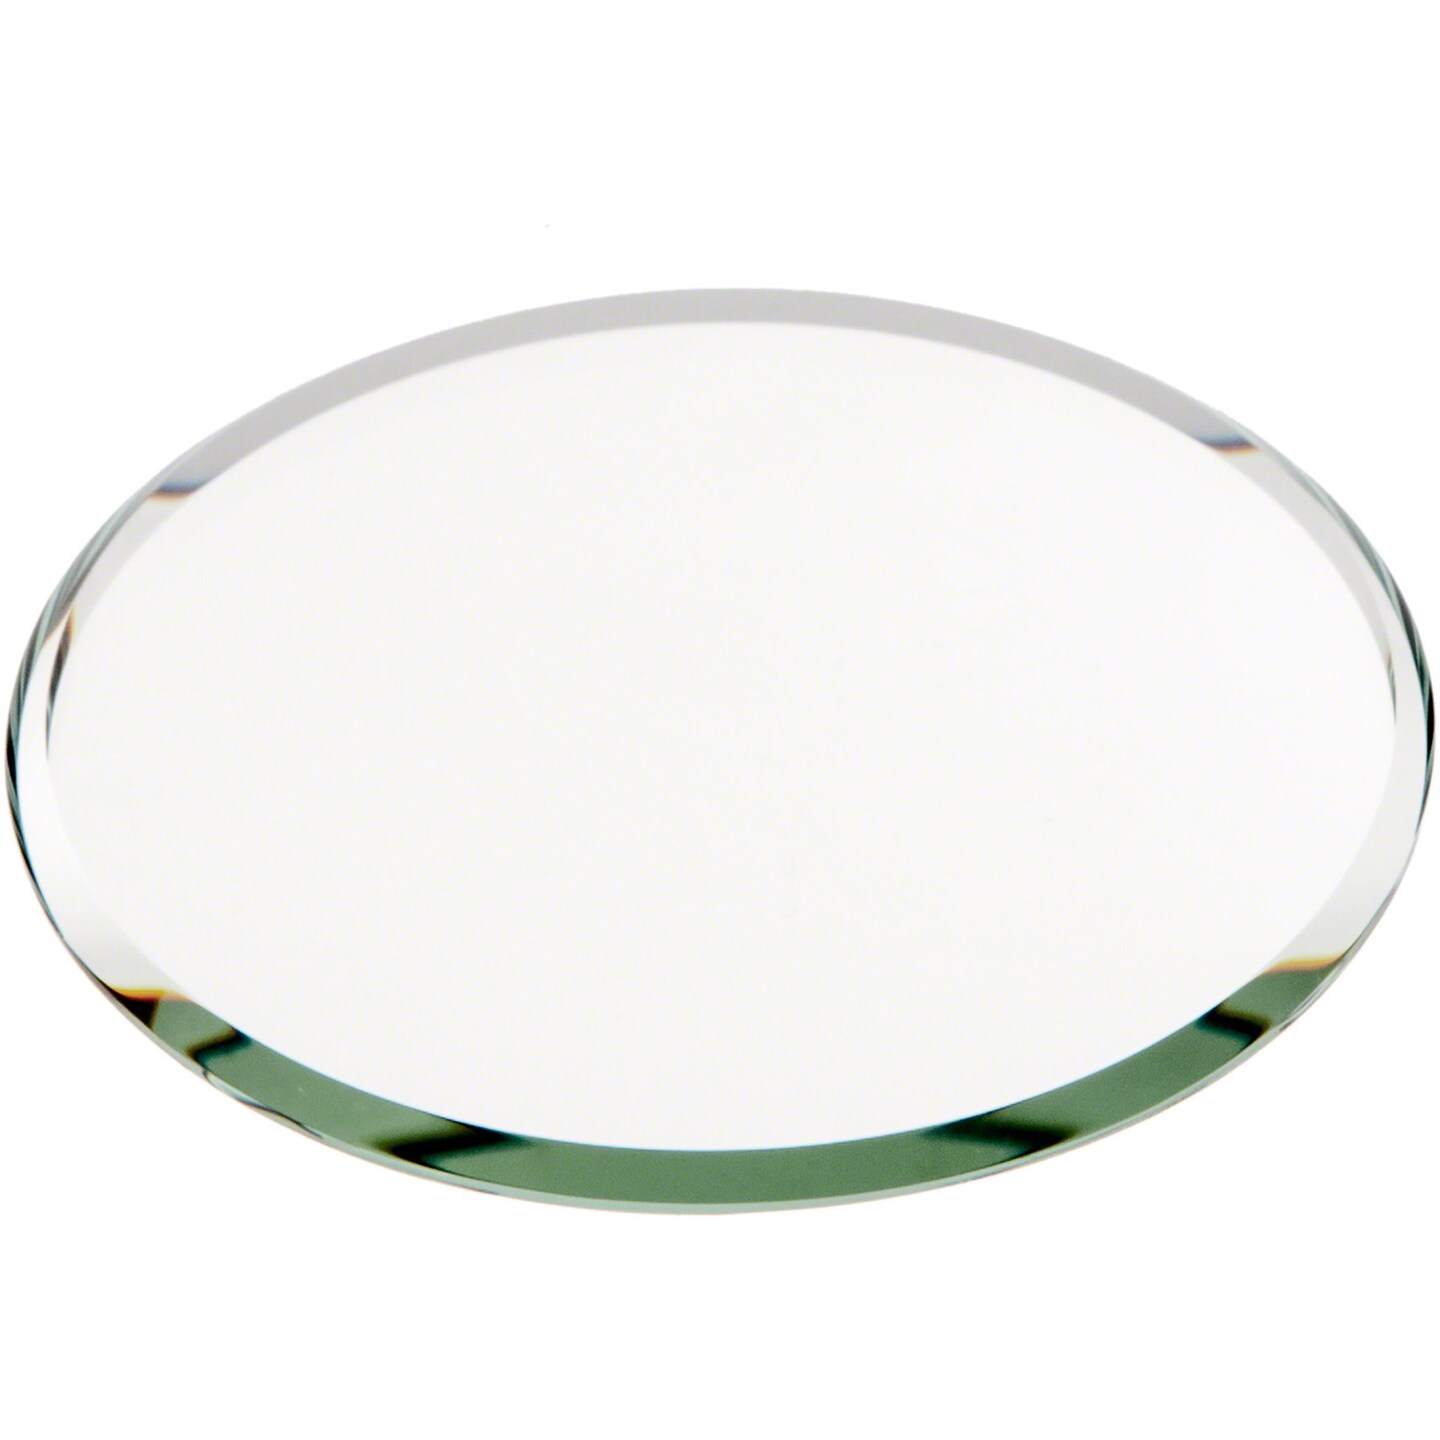 Mini 1 inch Small Round Glass Mirror Circles for Arts & Crafts Projects, 50